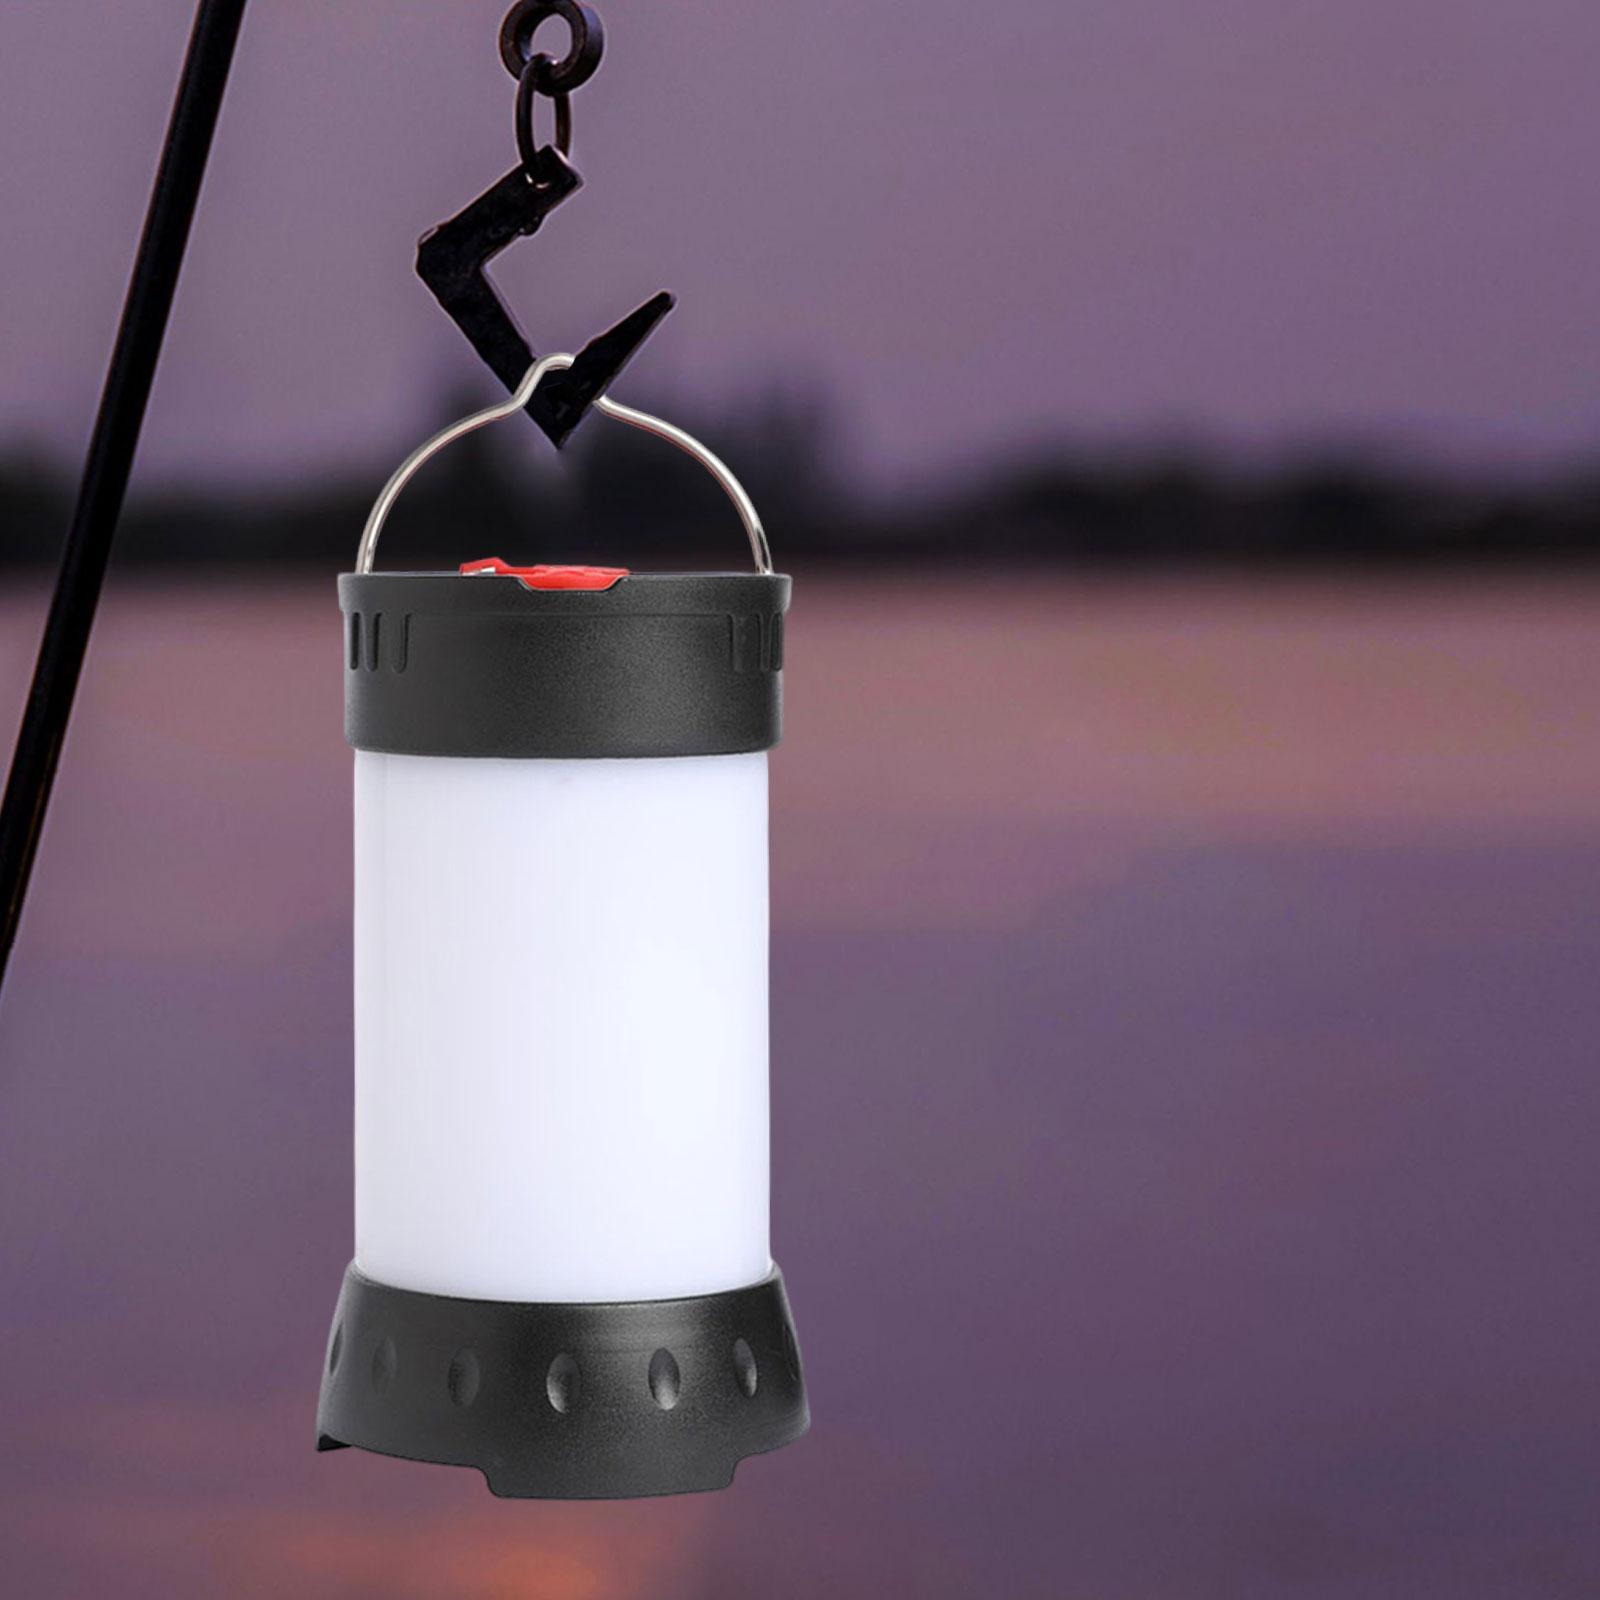 Tent Lighting Emergency Light Hanging Camping Lantern for Outdoor Home Porch